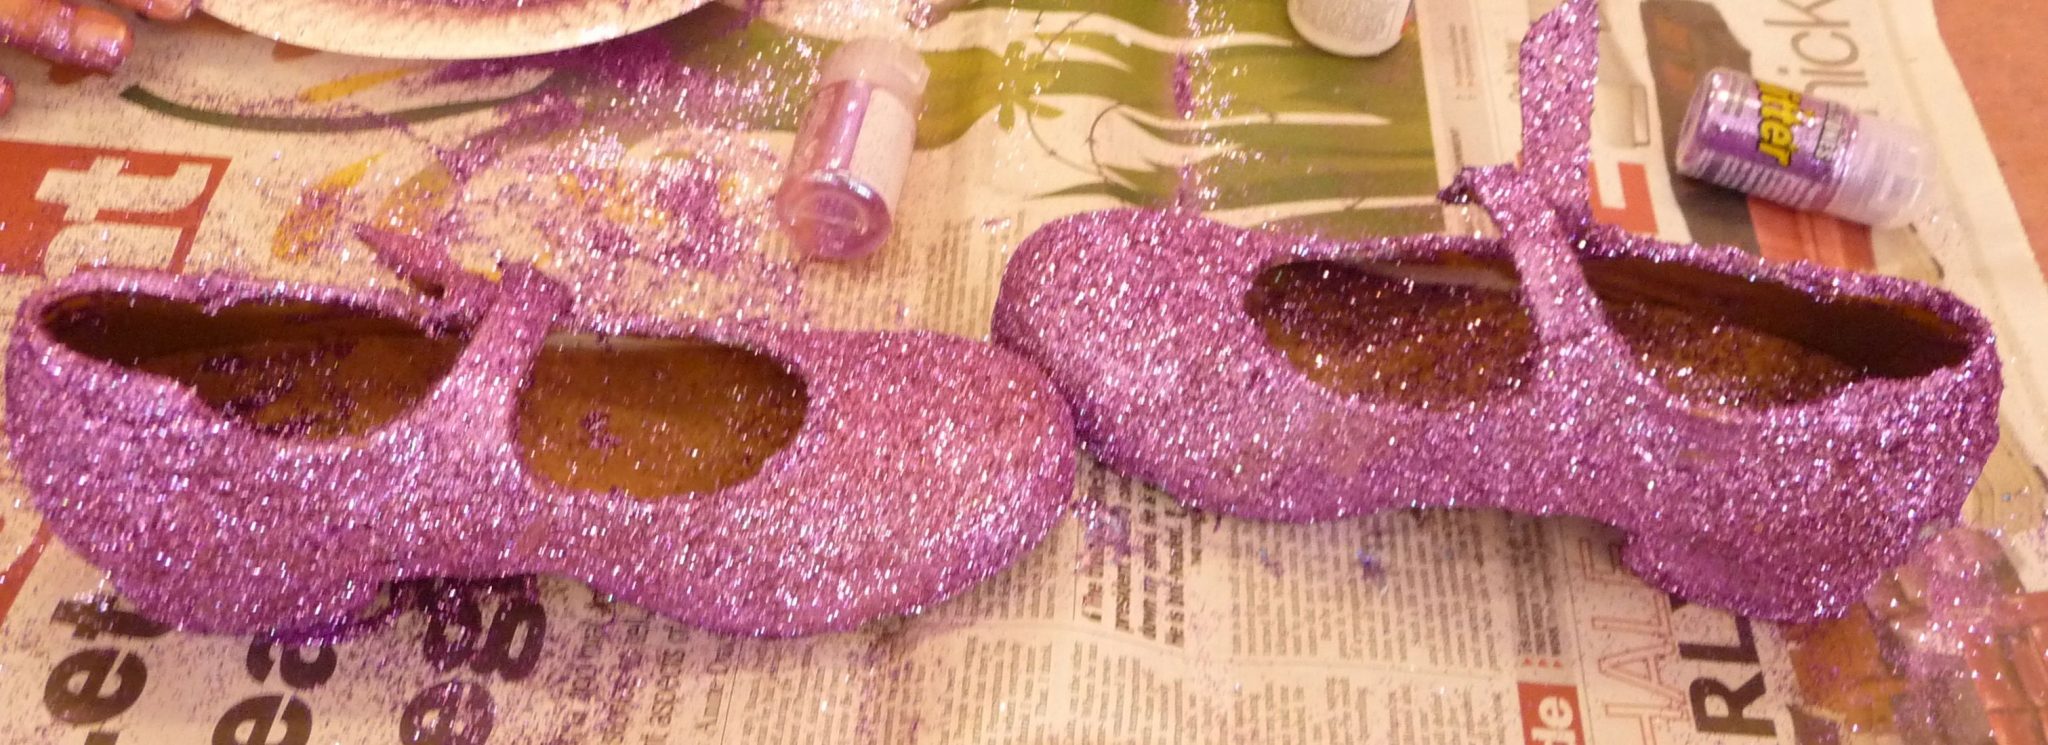 pink glitter tap shoes